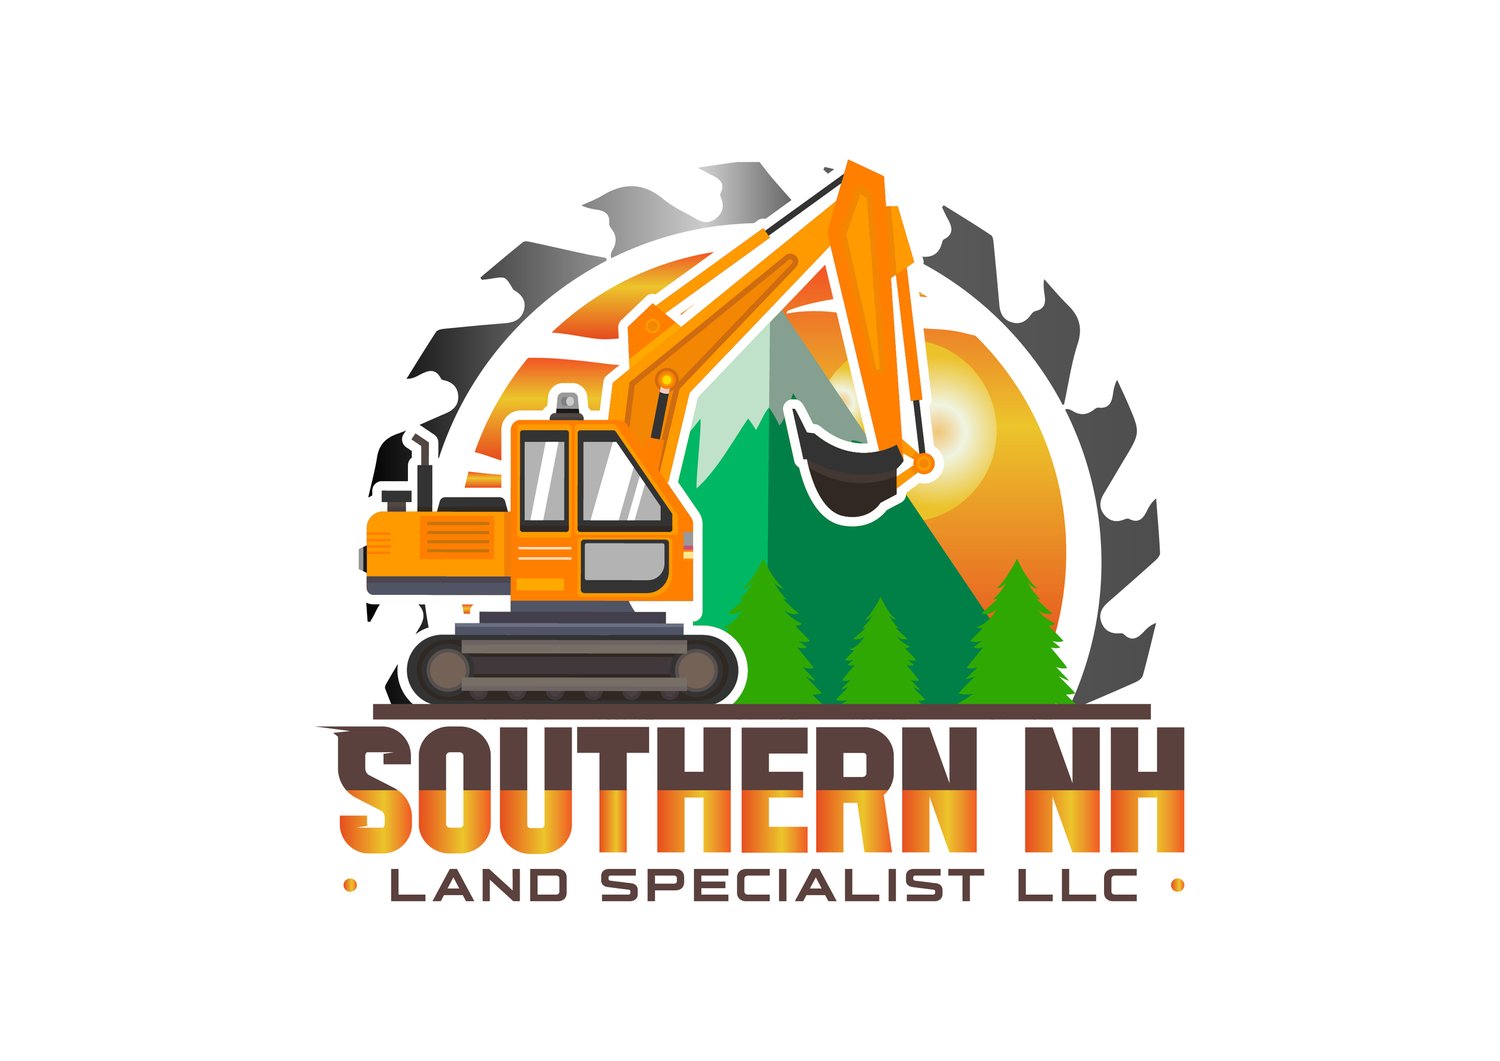 Southern New Hampshire Land Specialist